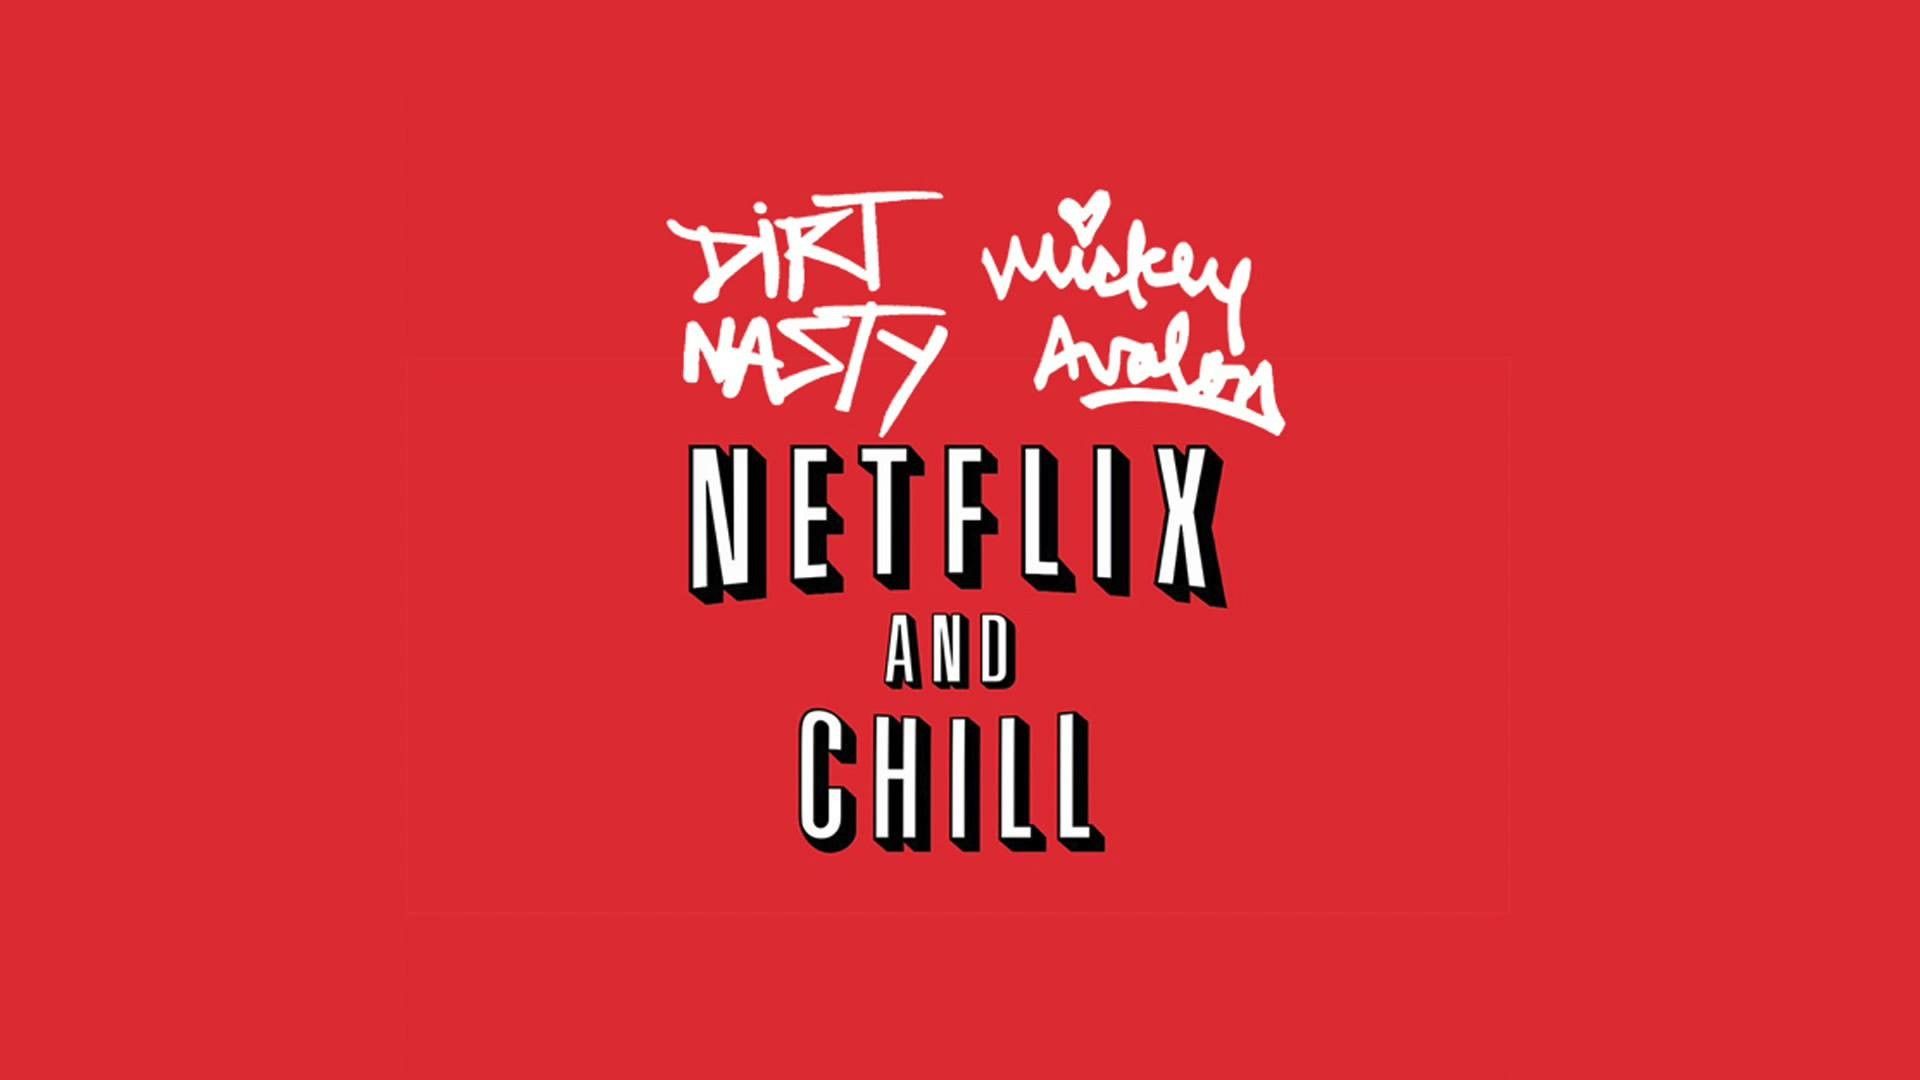 The poster for netflix and chill - Netflix